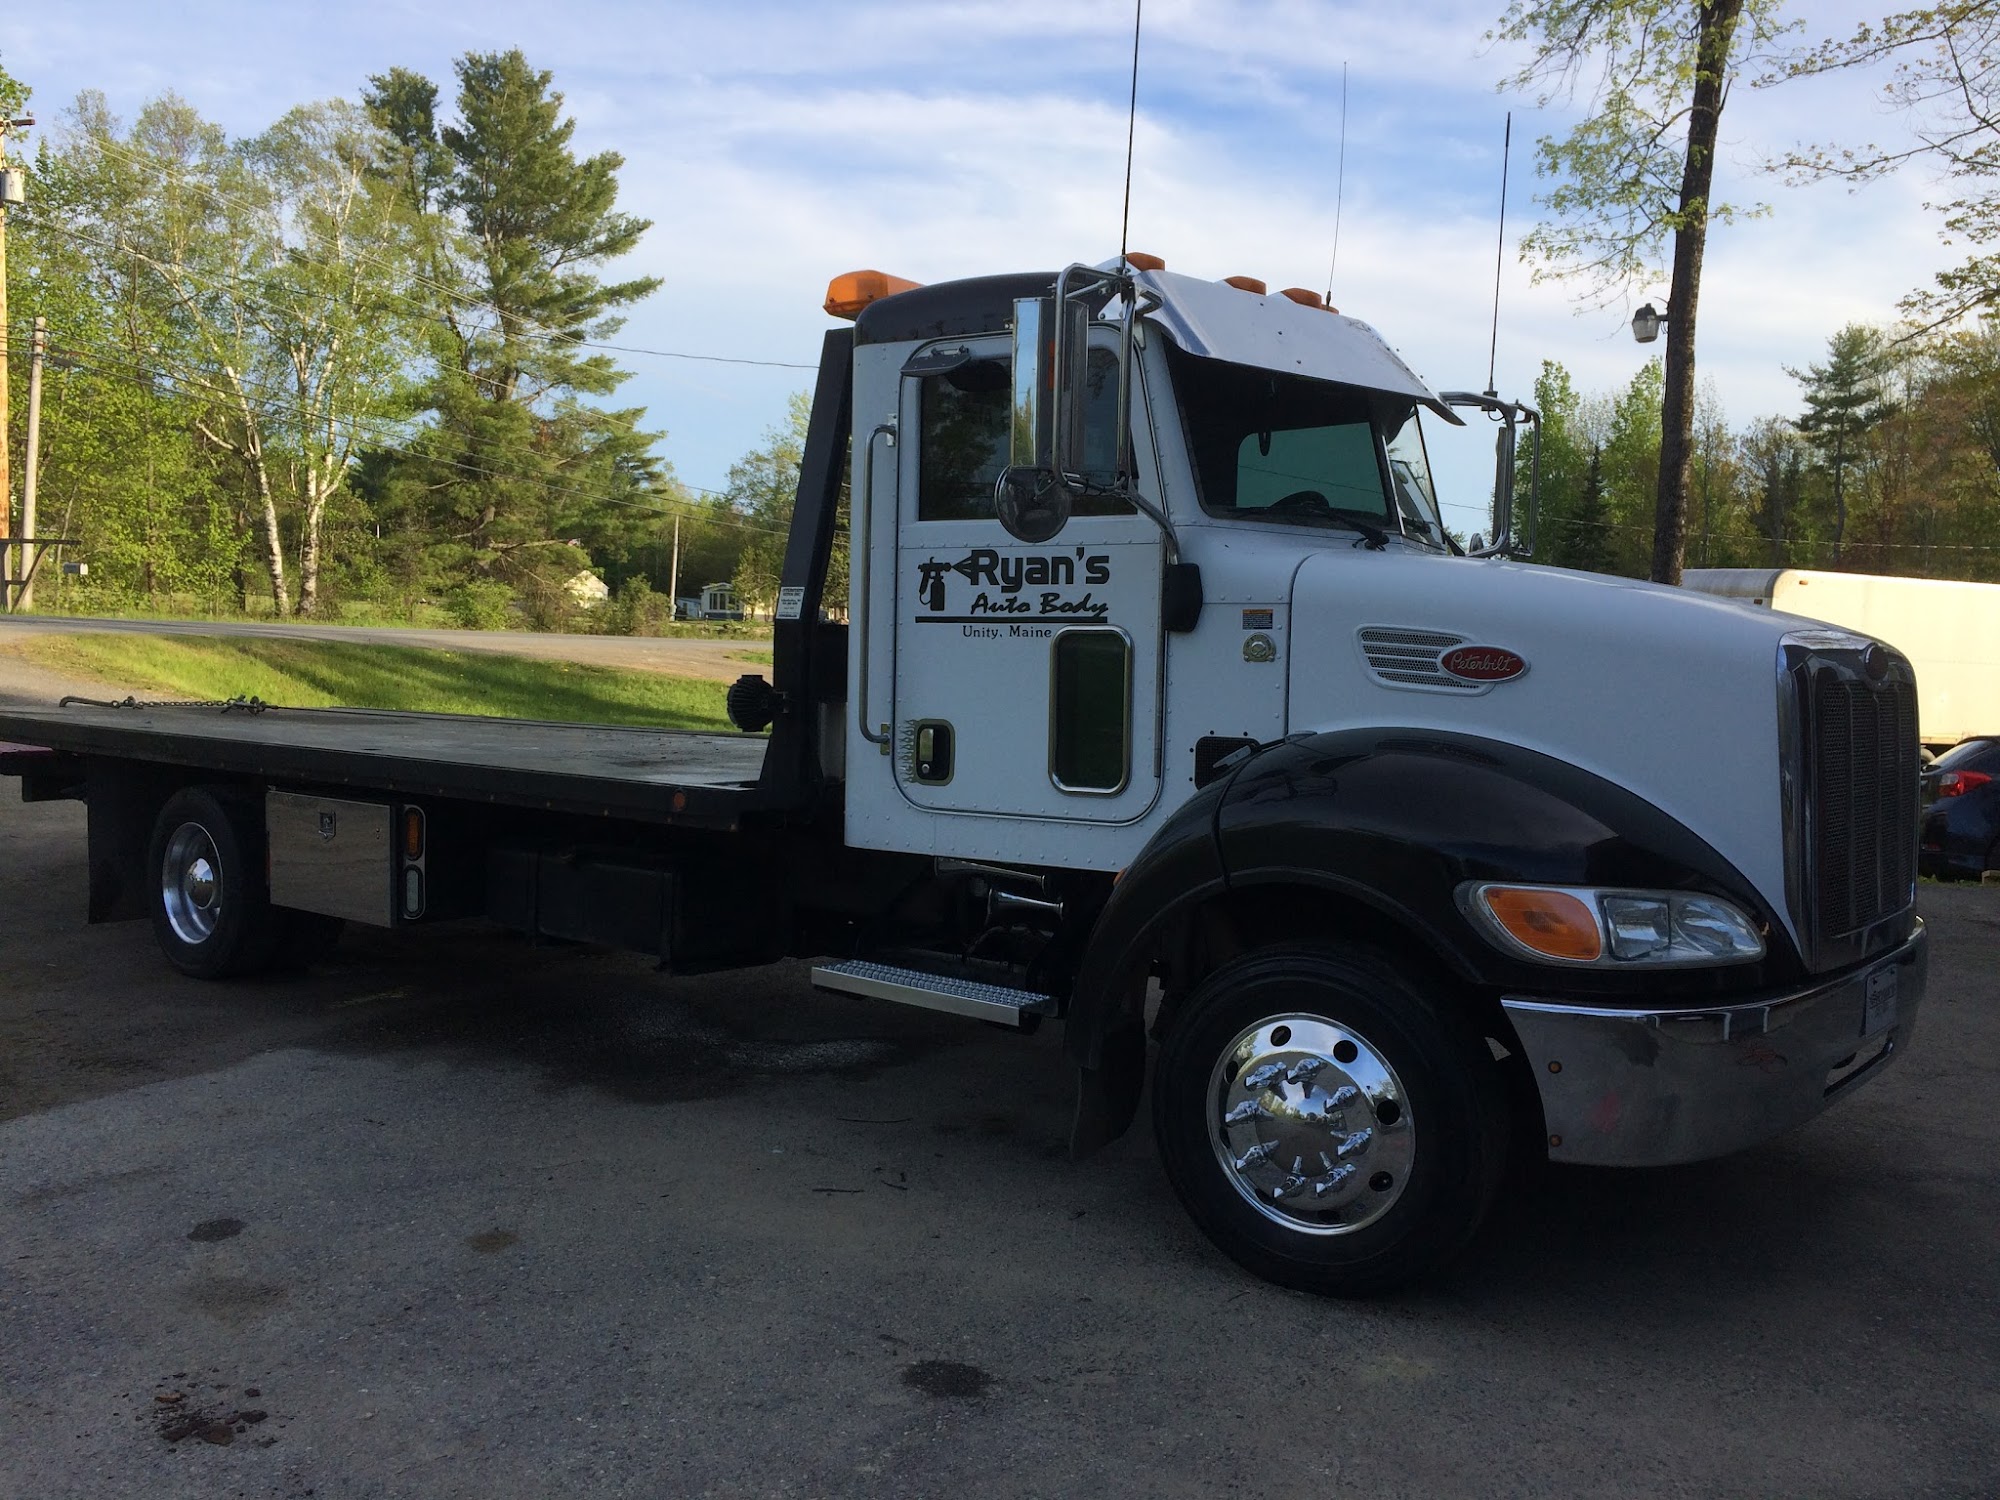 Ryans Towing & Recovery